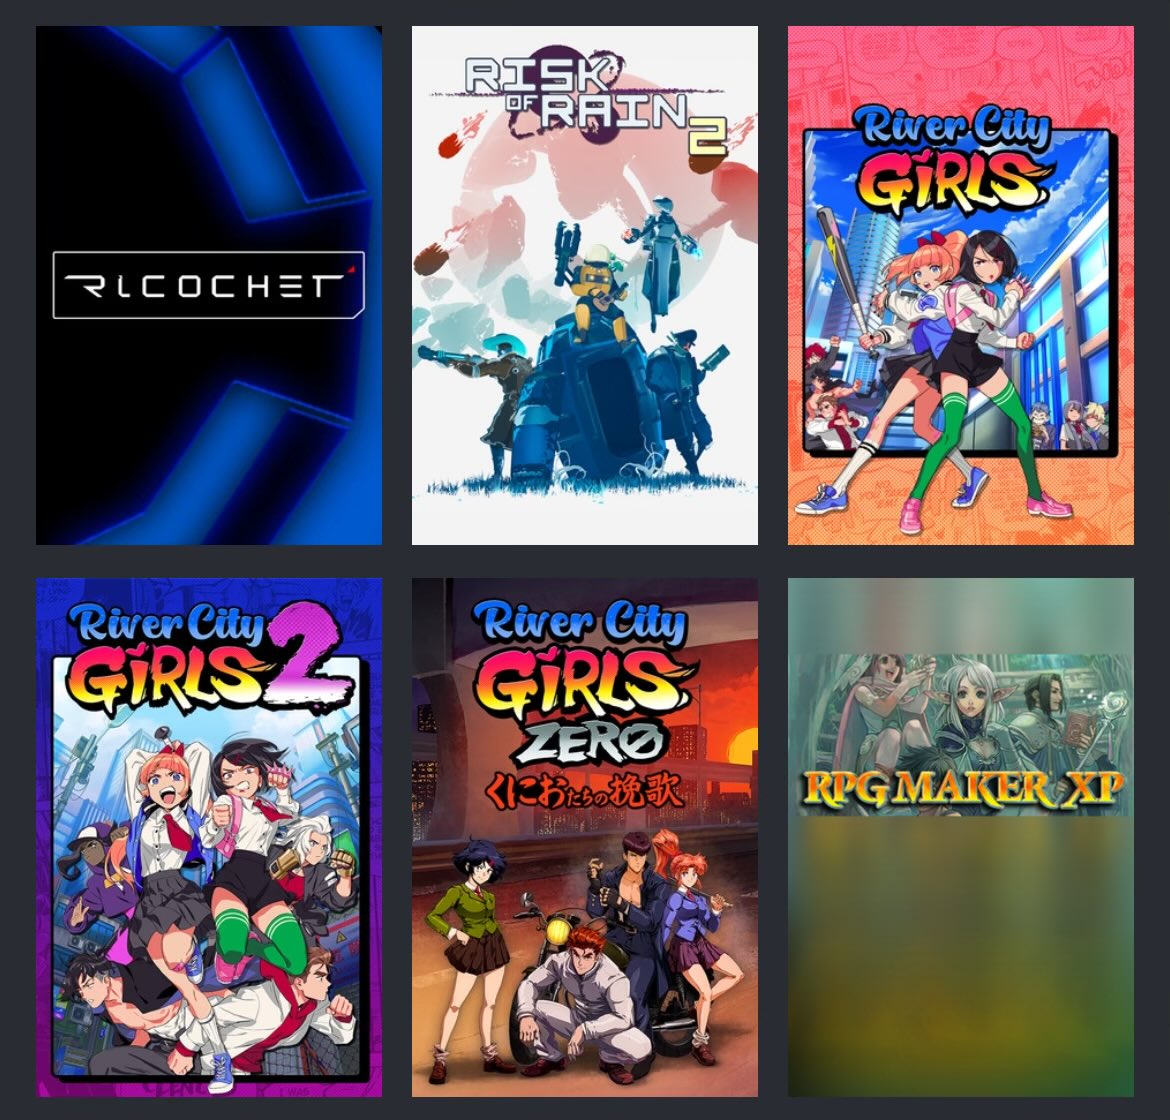 finally got river city girls 2 (along with 1 and zero on steam)